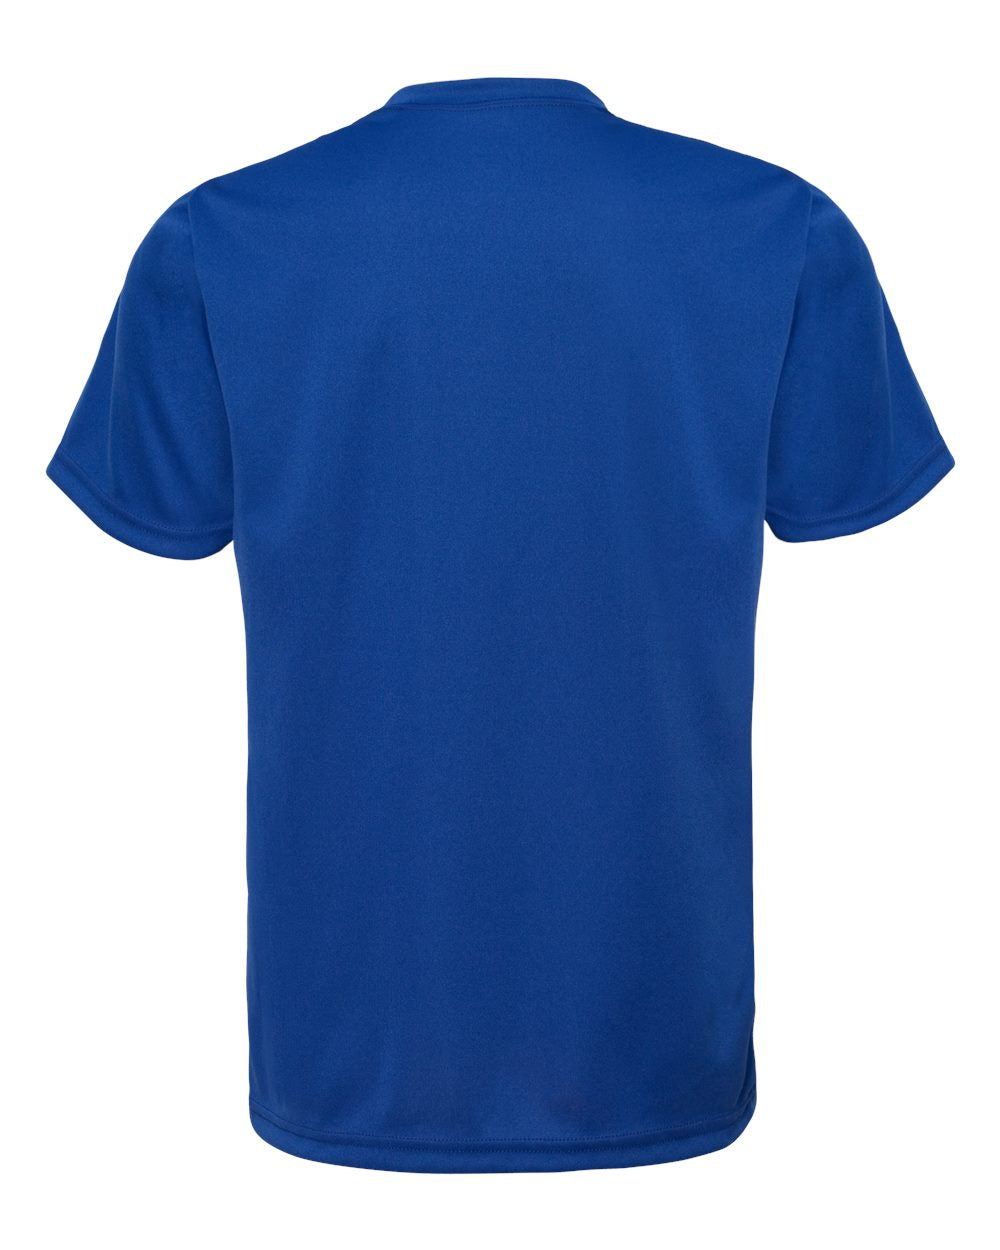 C2 Sport Youth Performance T-Shirt 5200 #color_Royal